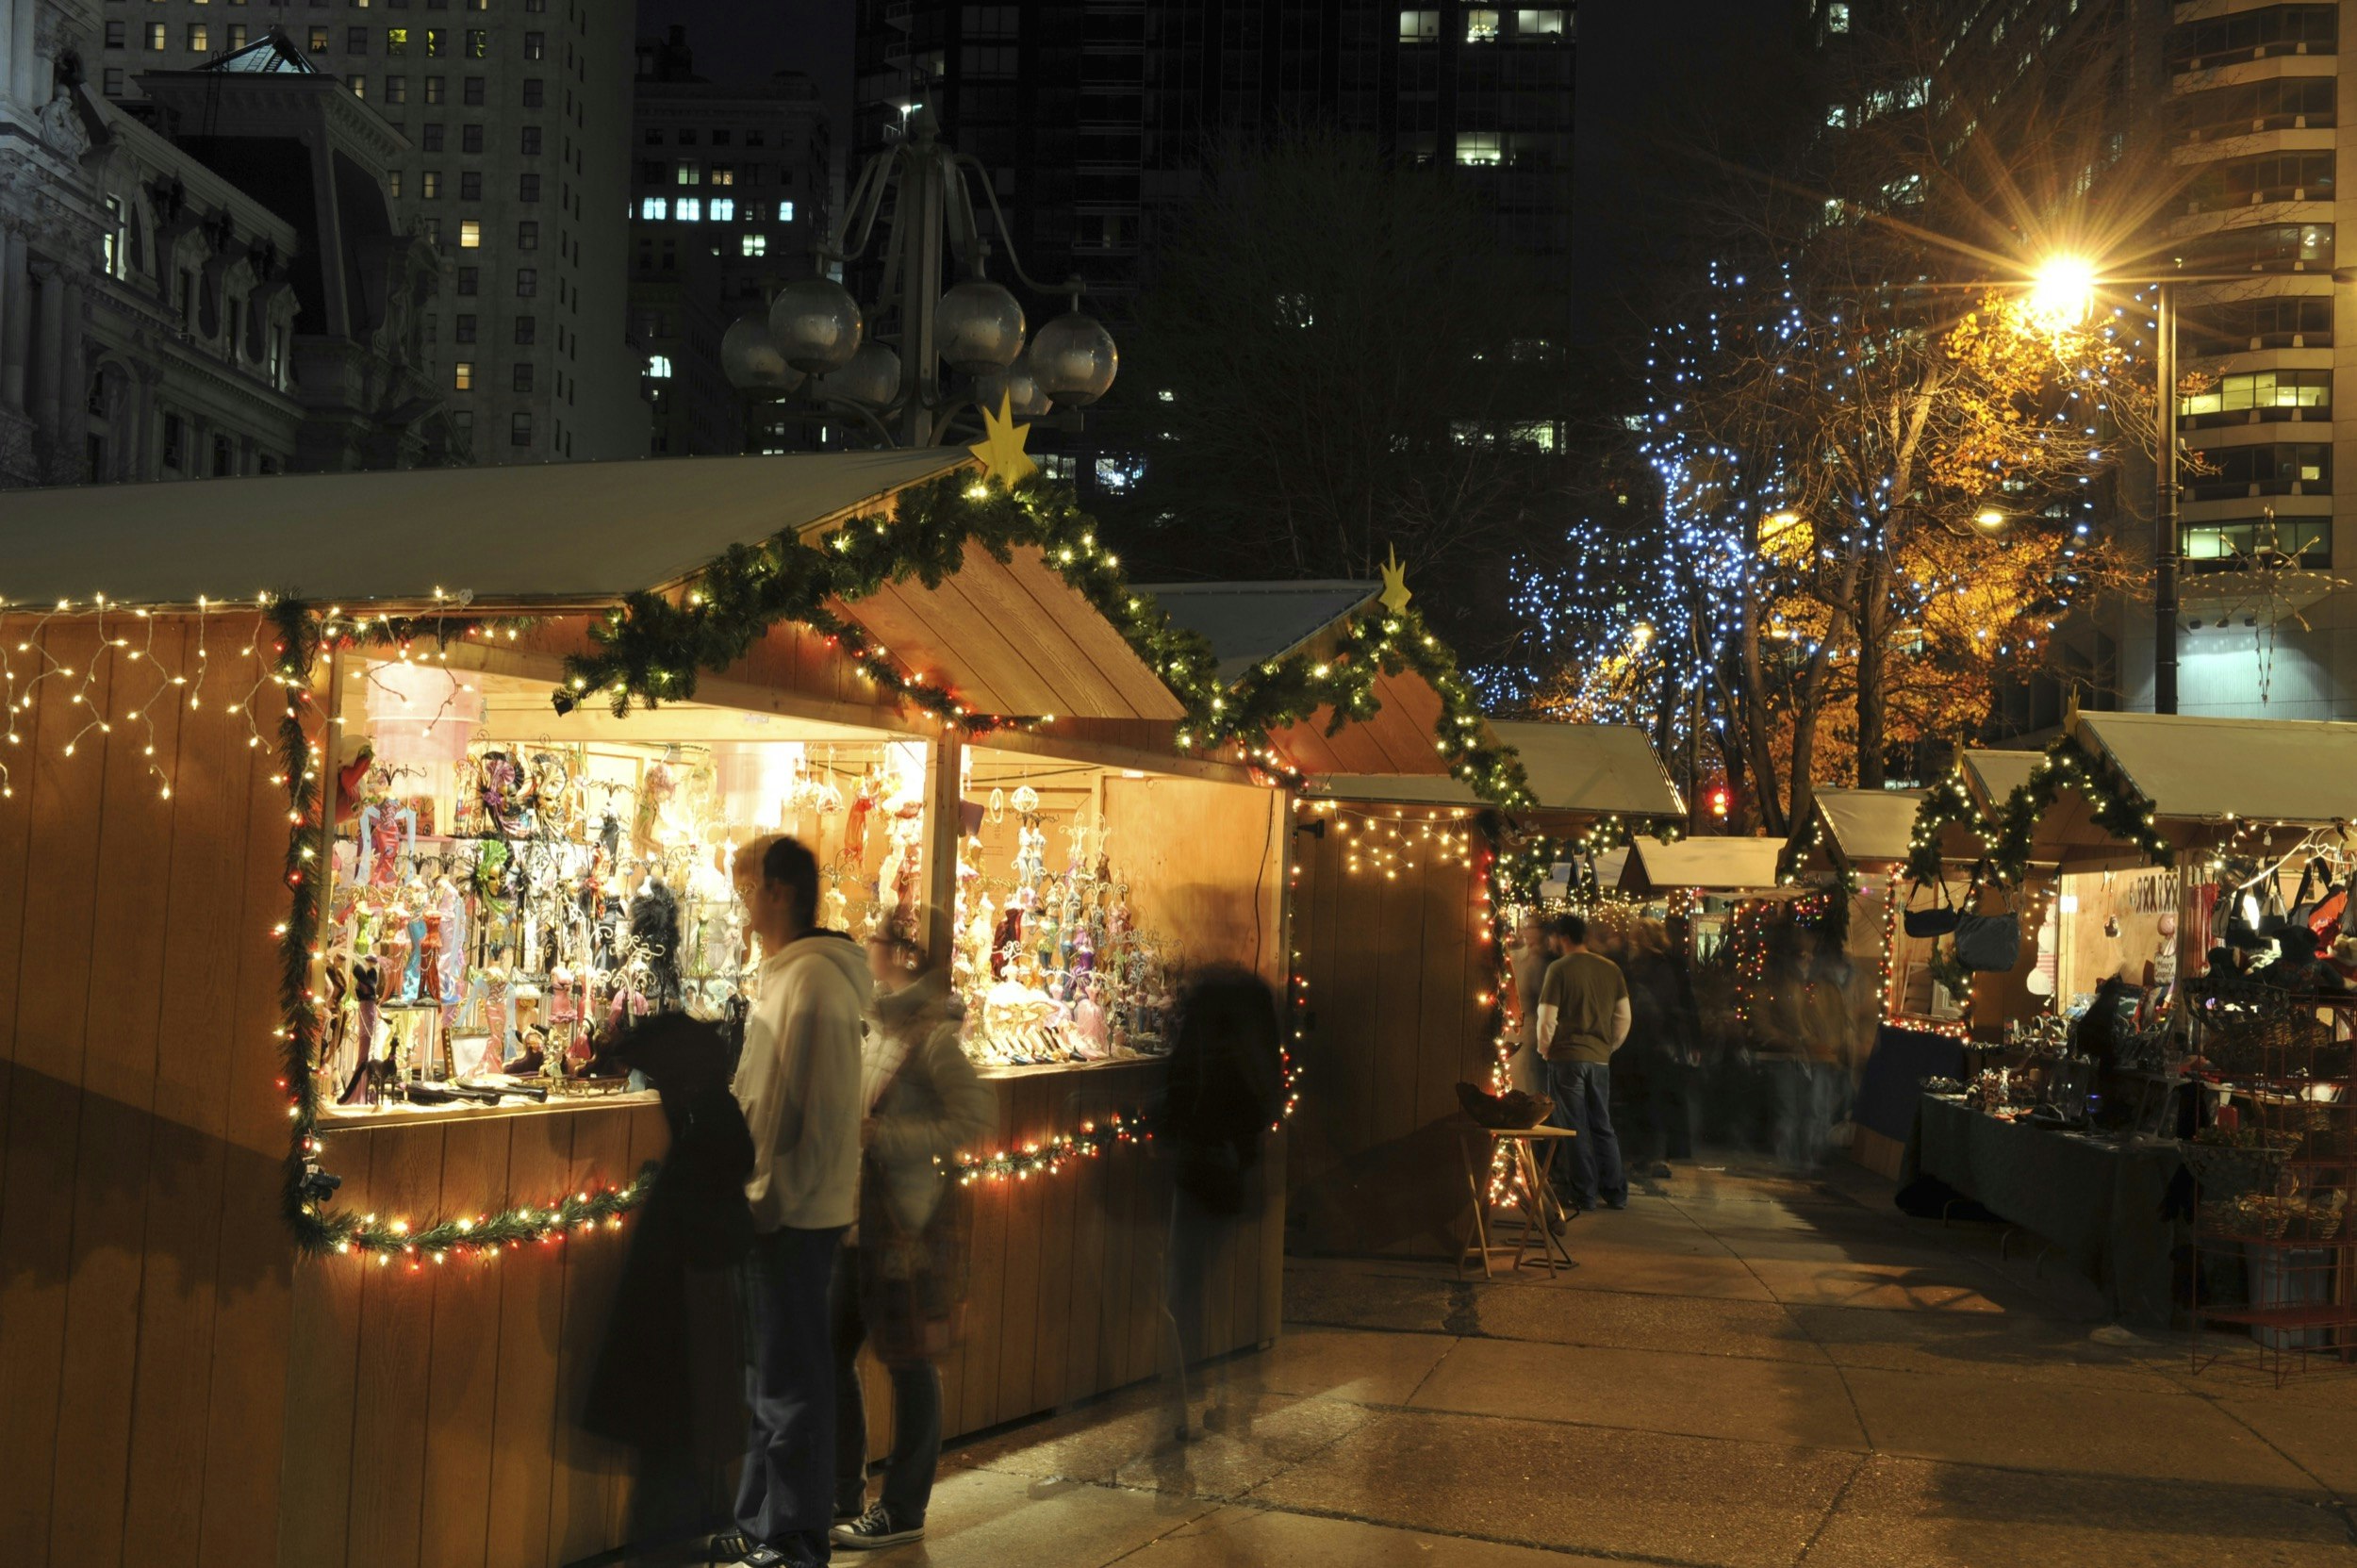 People walk past wooden merchant stalls during Christmas in Philadelphia at night